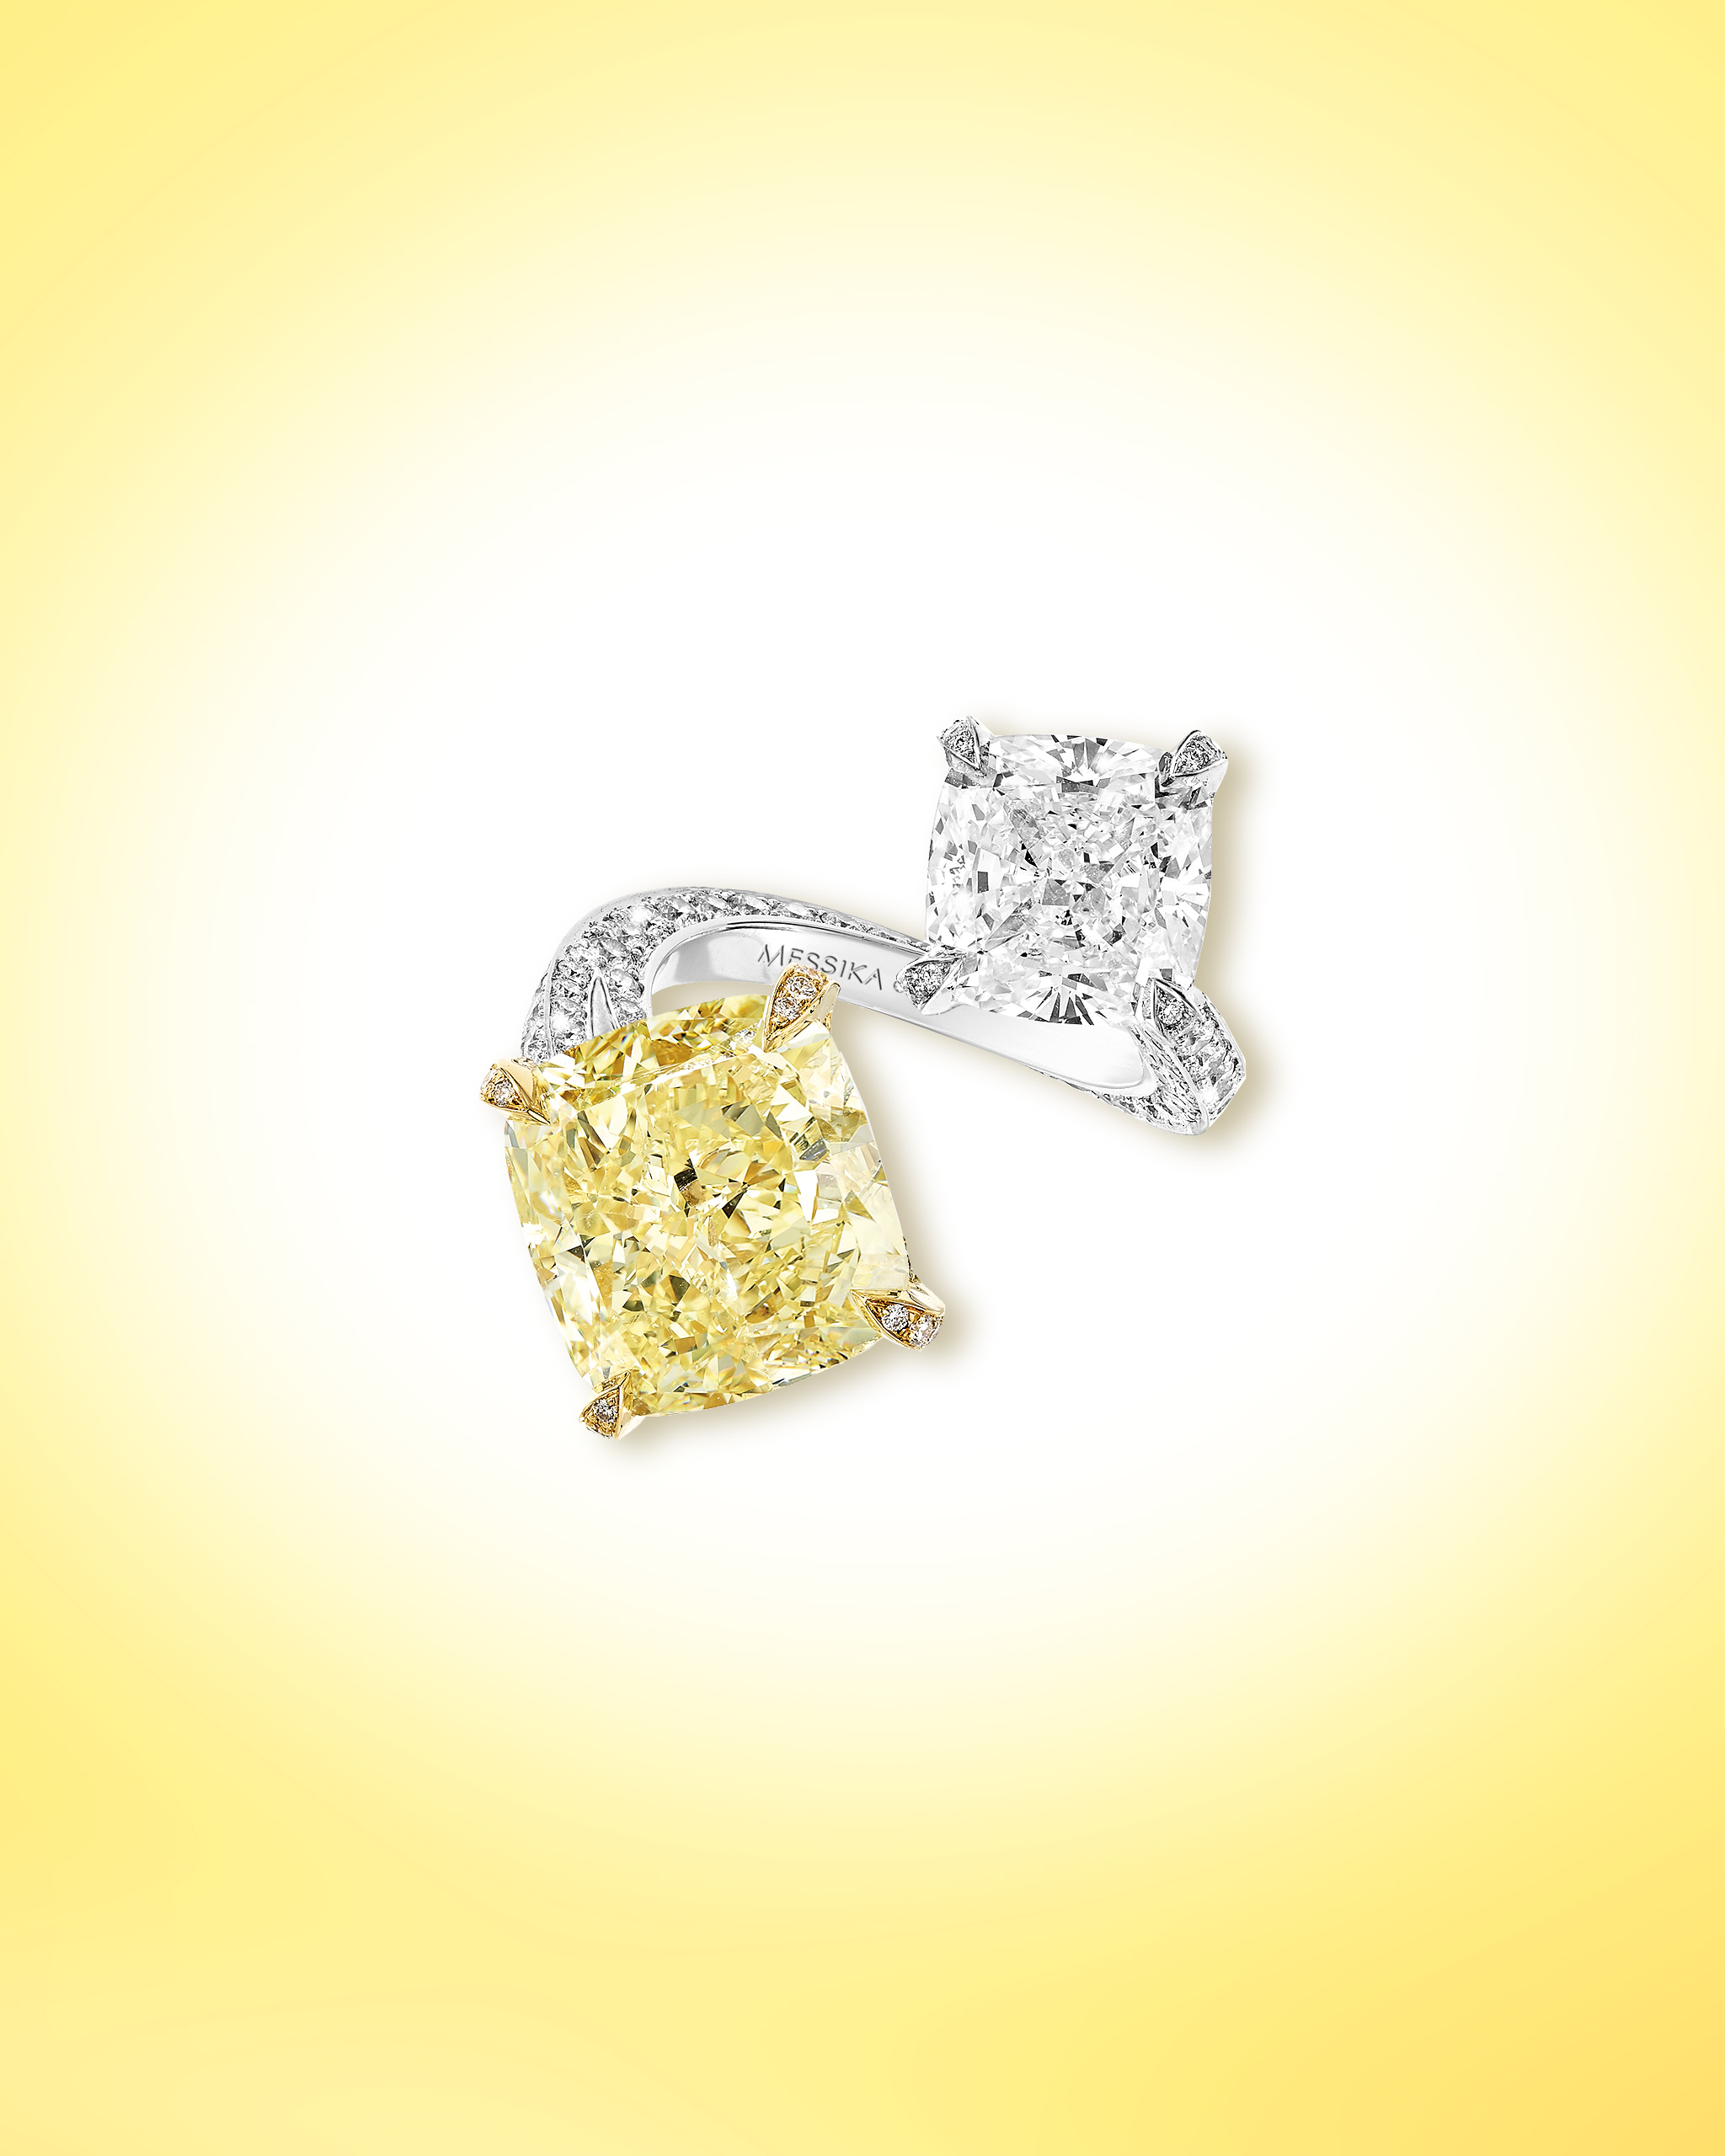 The Sun Kiss ring: cushion cut yellow & white diamonds ring in a toi et moi setting on a platinum band from Messika